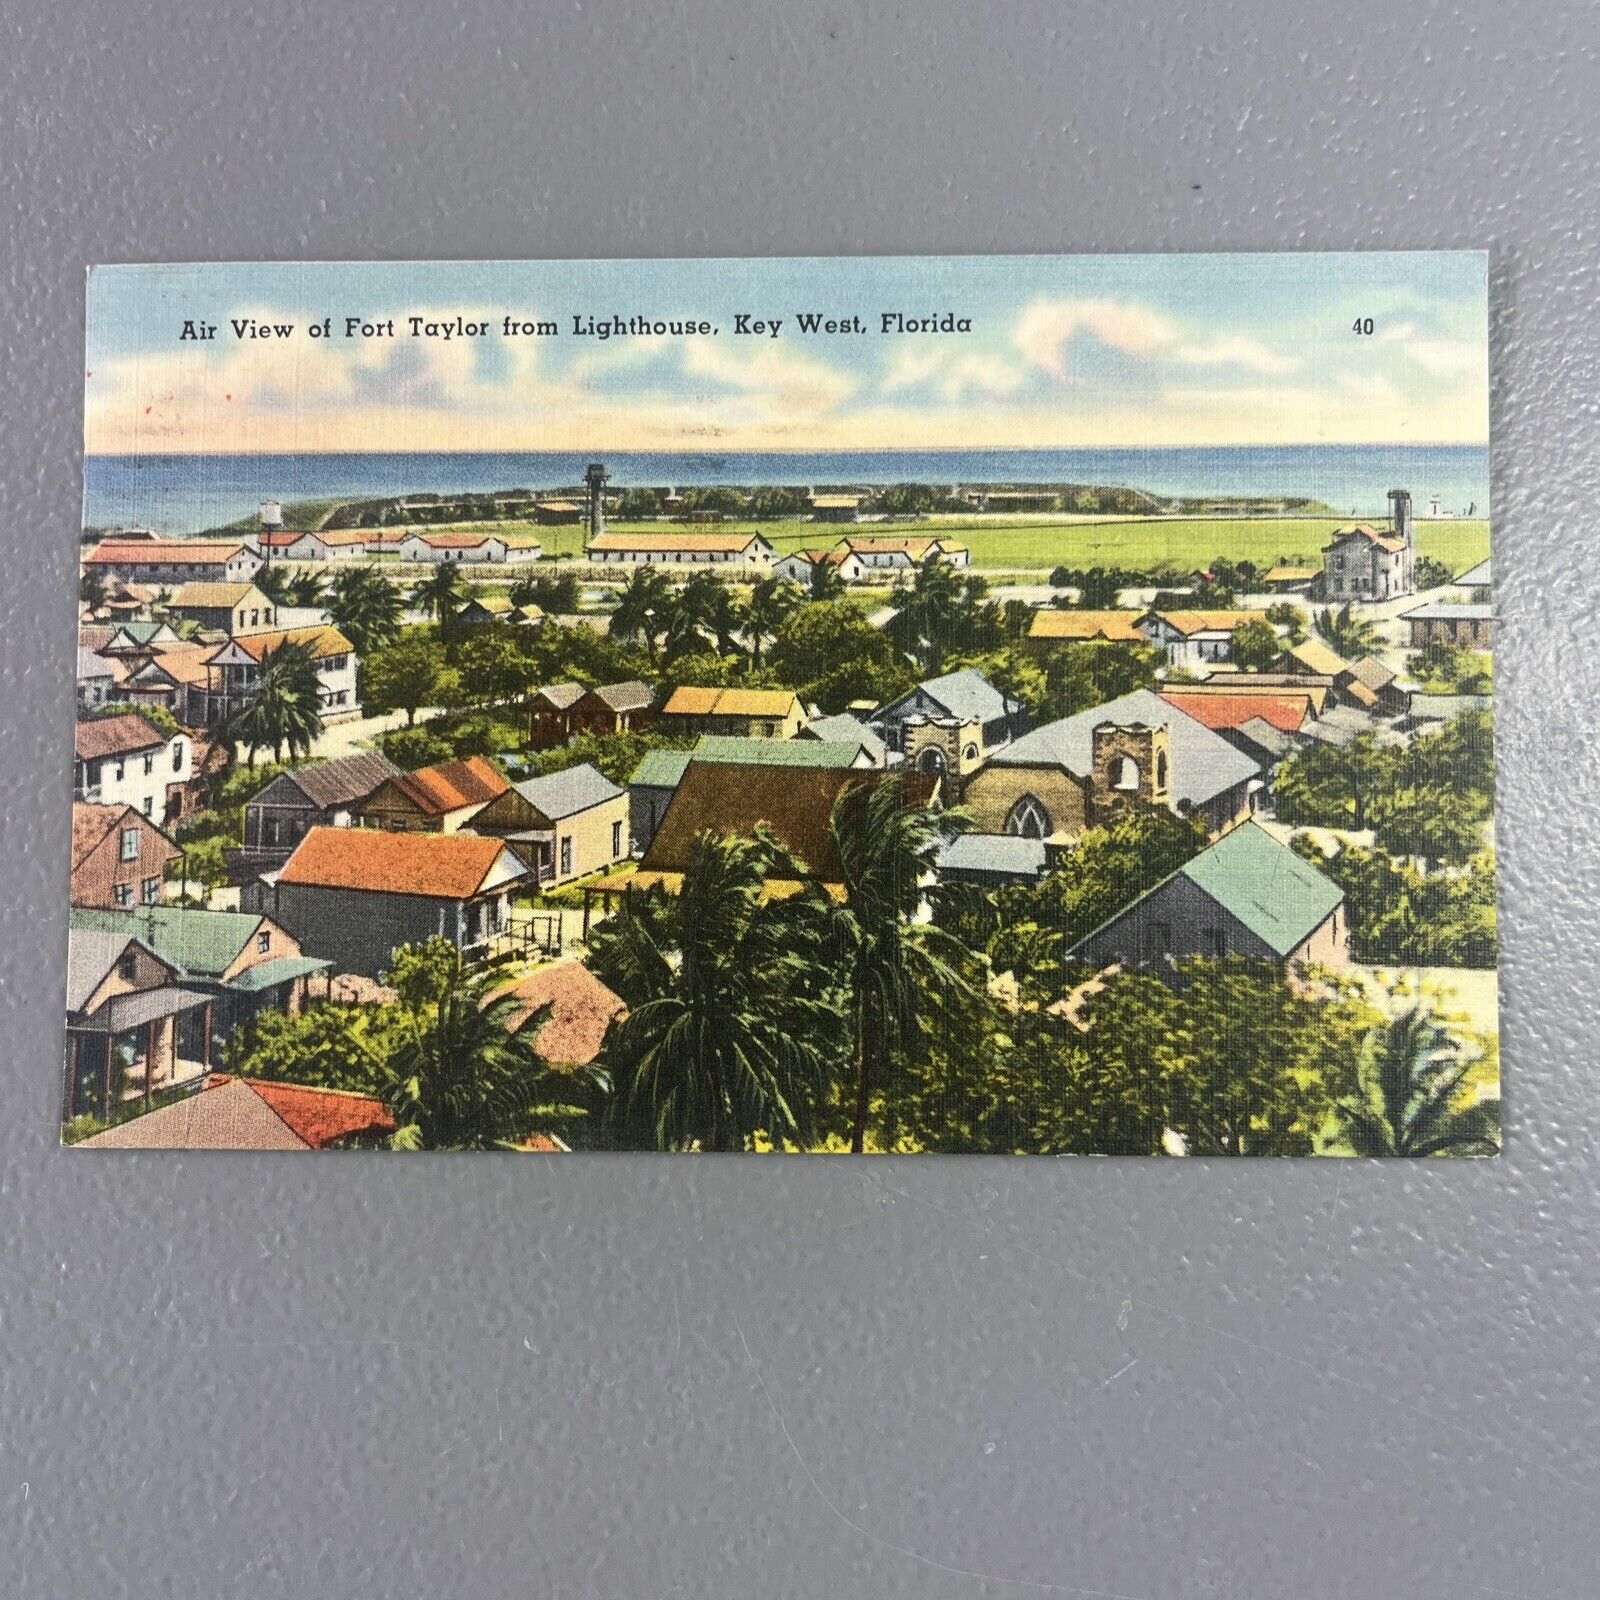 Linen Postcard Aerial View of Fort Taylor Lighthouse in Key West, Florida 1953